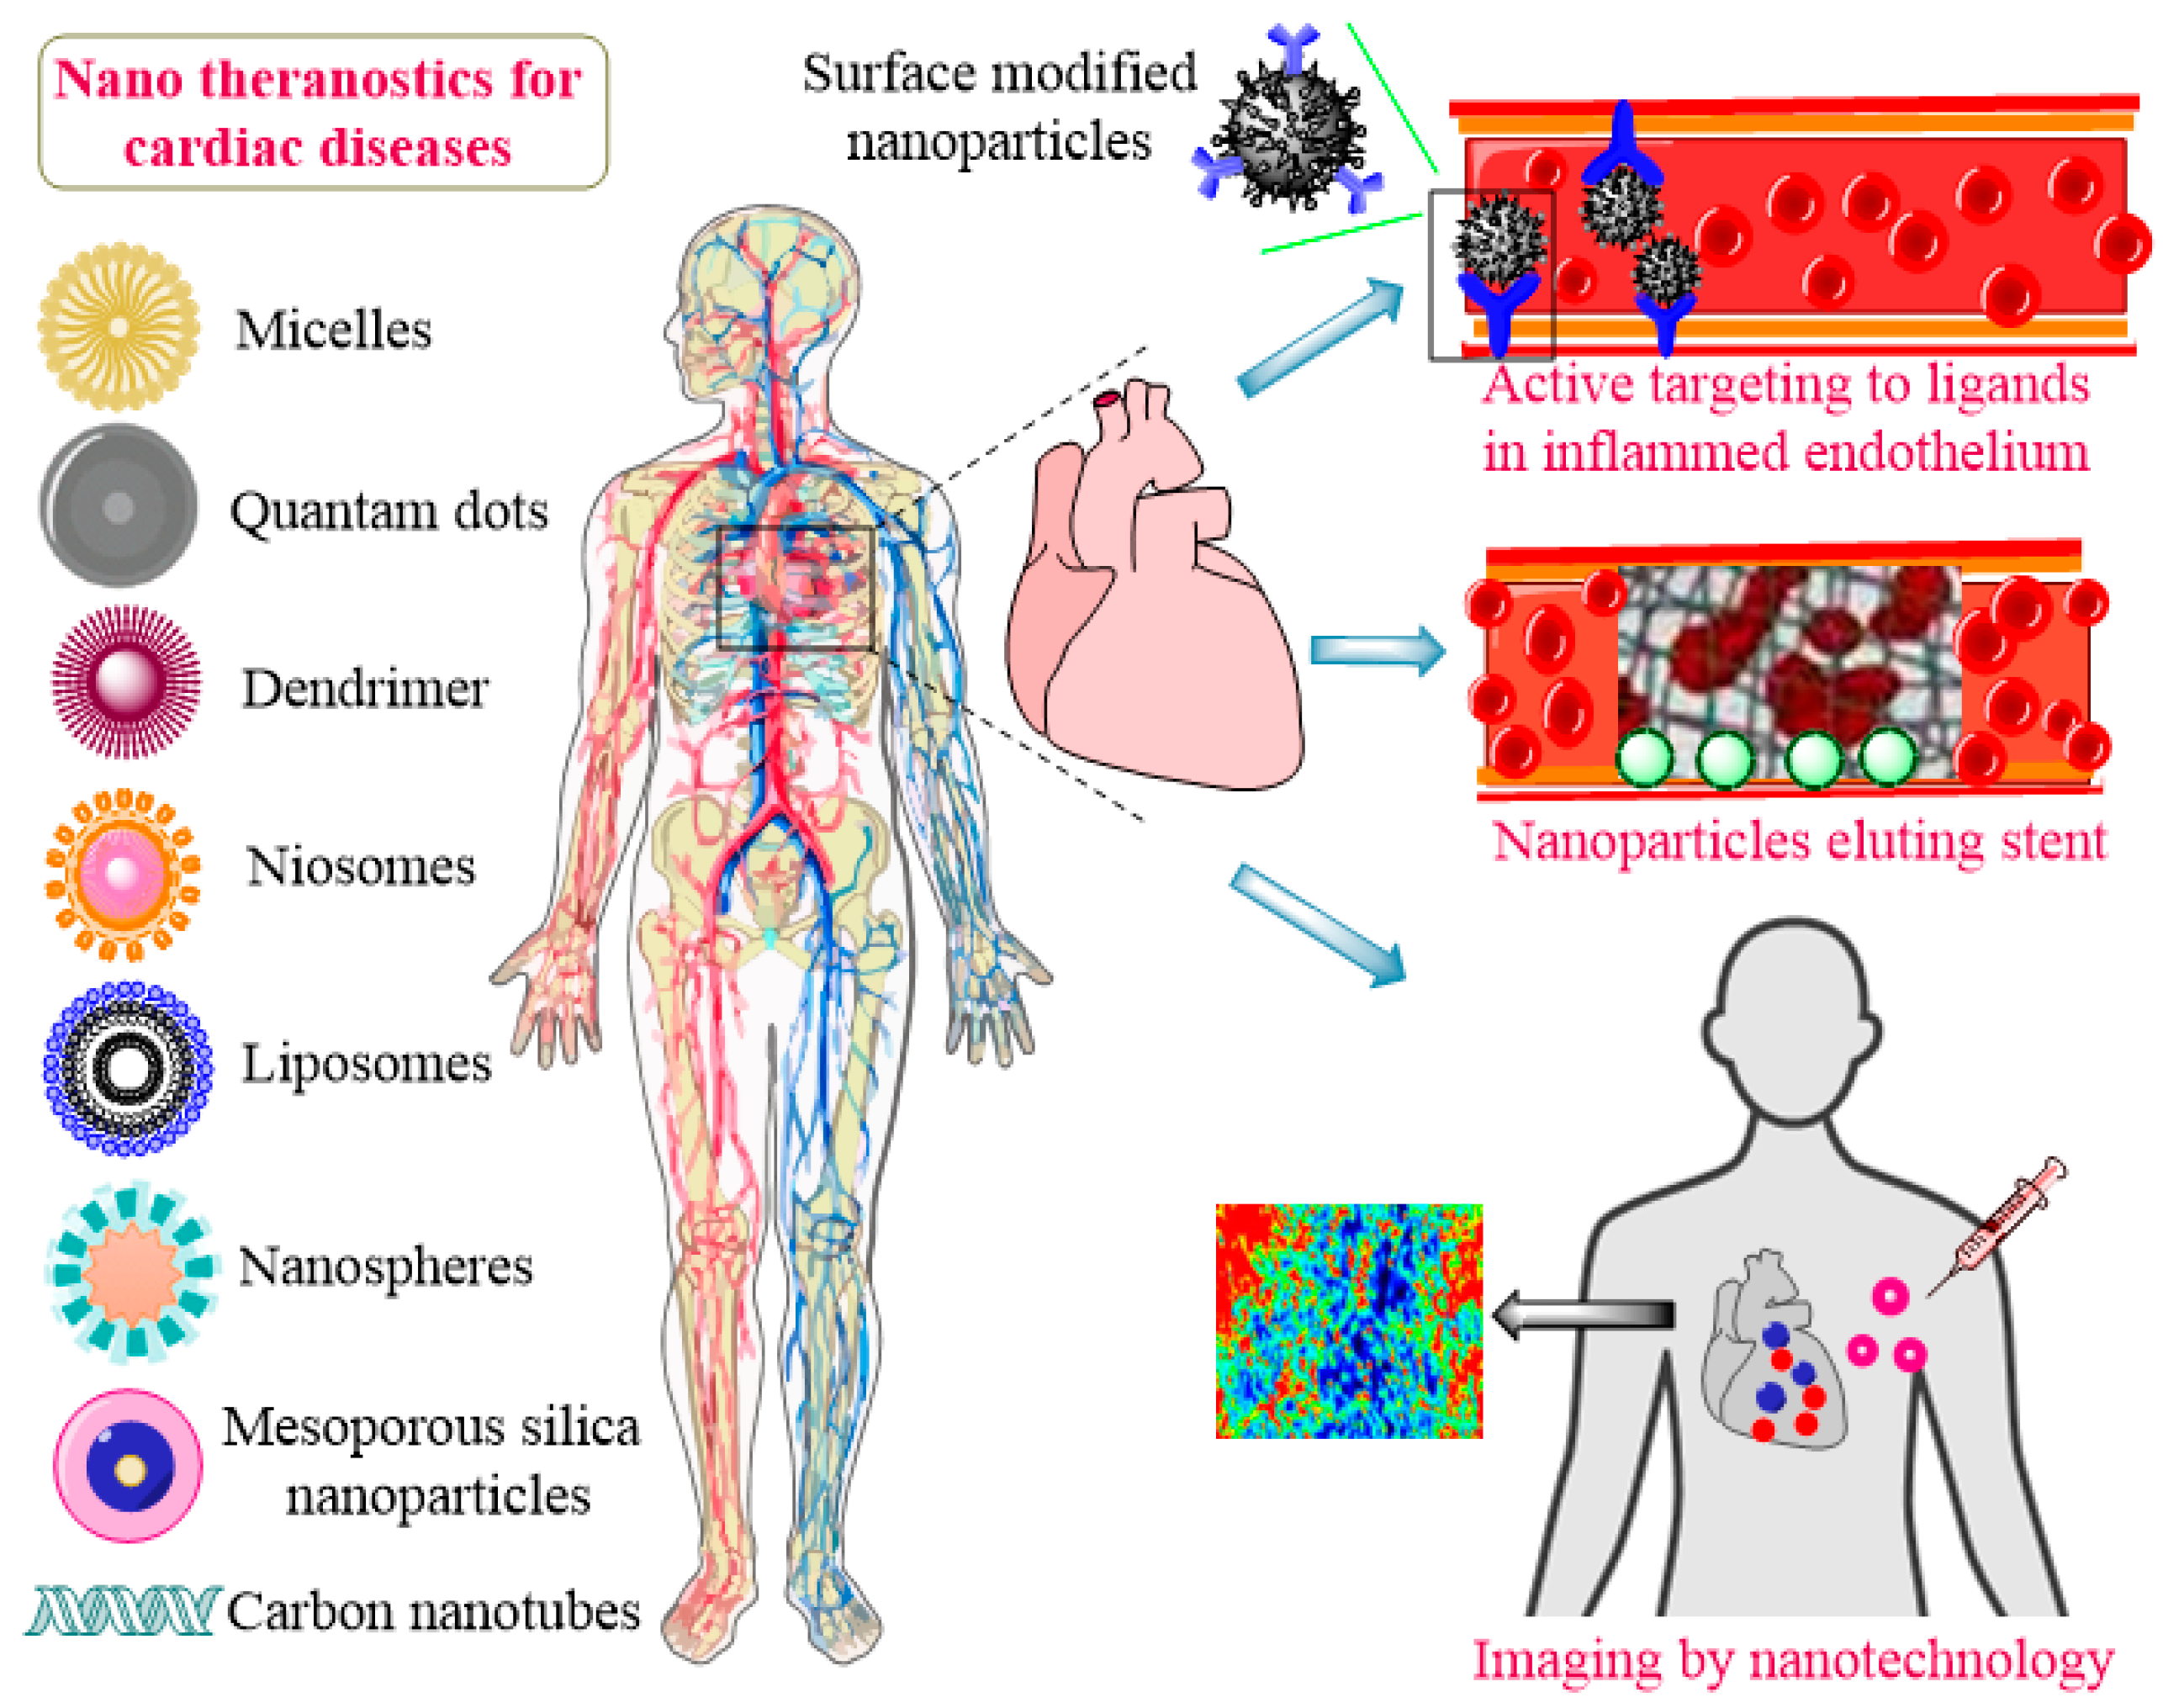 Chemosensors | Free Full-Text | Nanodiagnosis and Nanotreatment of Cardiovascular Diseases: An Overview